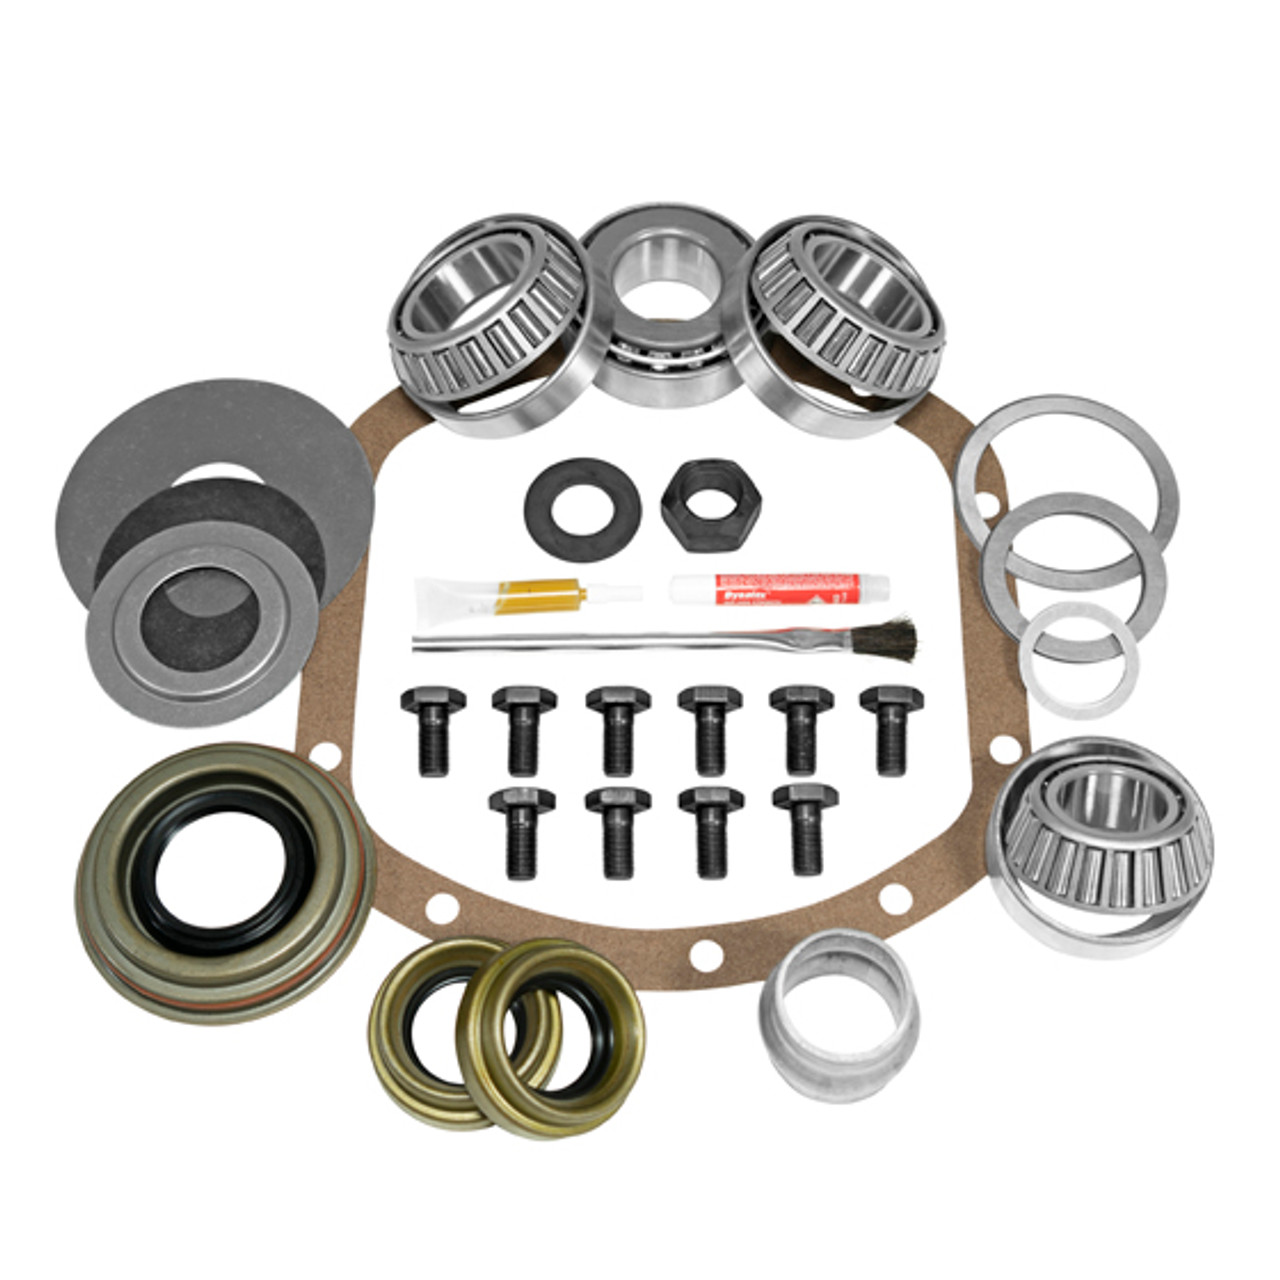 USA Standard Master Overhaul Kit Front Differential for 2001-2005 Ford Dana "Super" 30